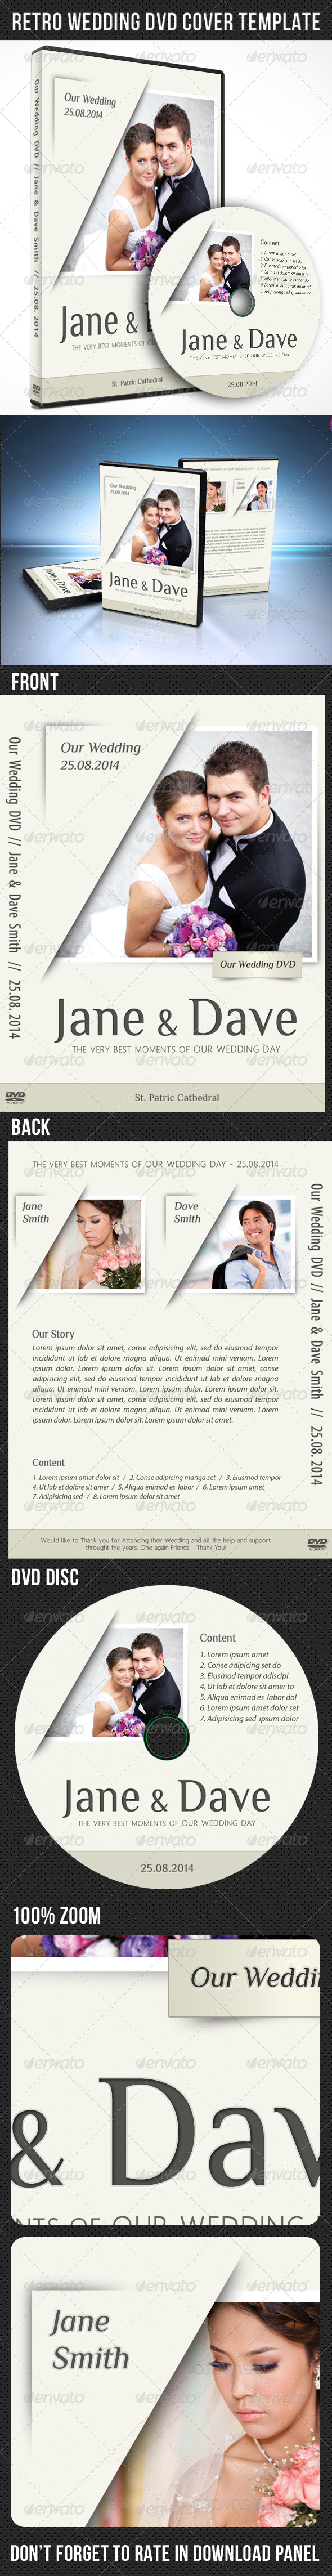 GraphicRiver Wedding DVD Cover Template 04 7638706